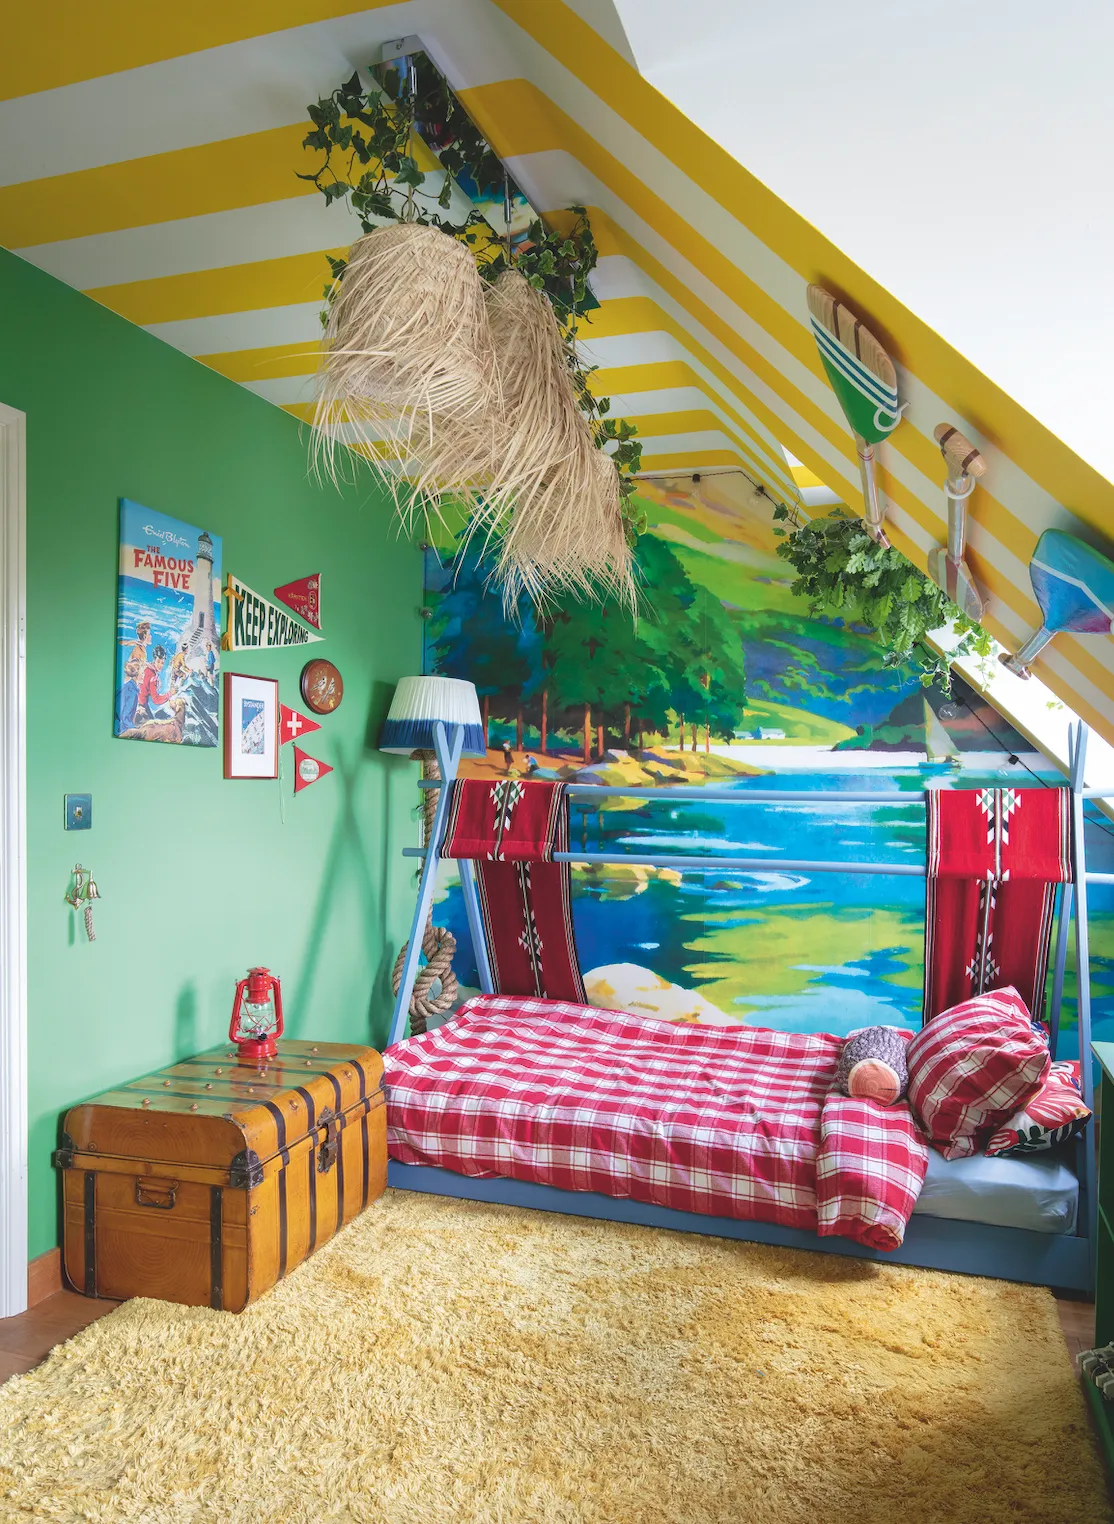 The mural in Tony’s bedroom was made from a vintage travel poster Anna had enlarged, and she painted the yellow stripes and made themed accessories herself. ‘Pretty much everything in his room has been made or customised by me,’ she says